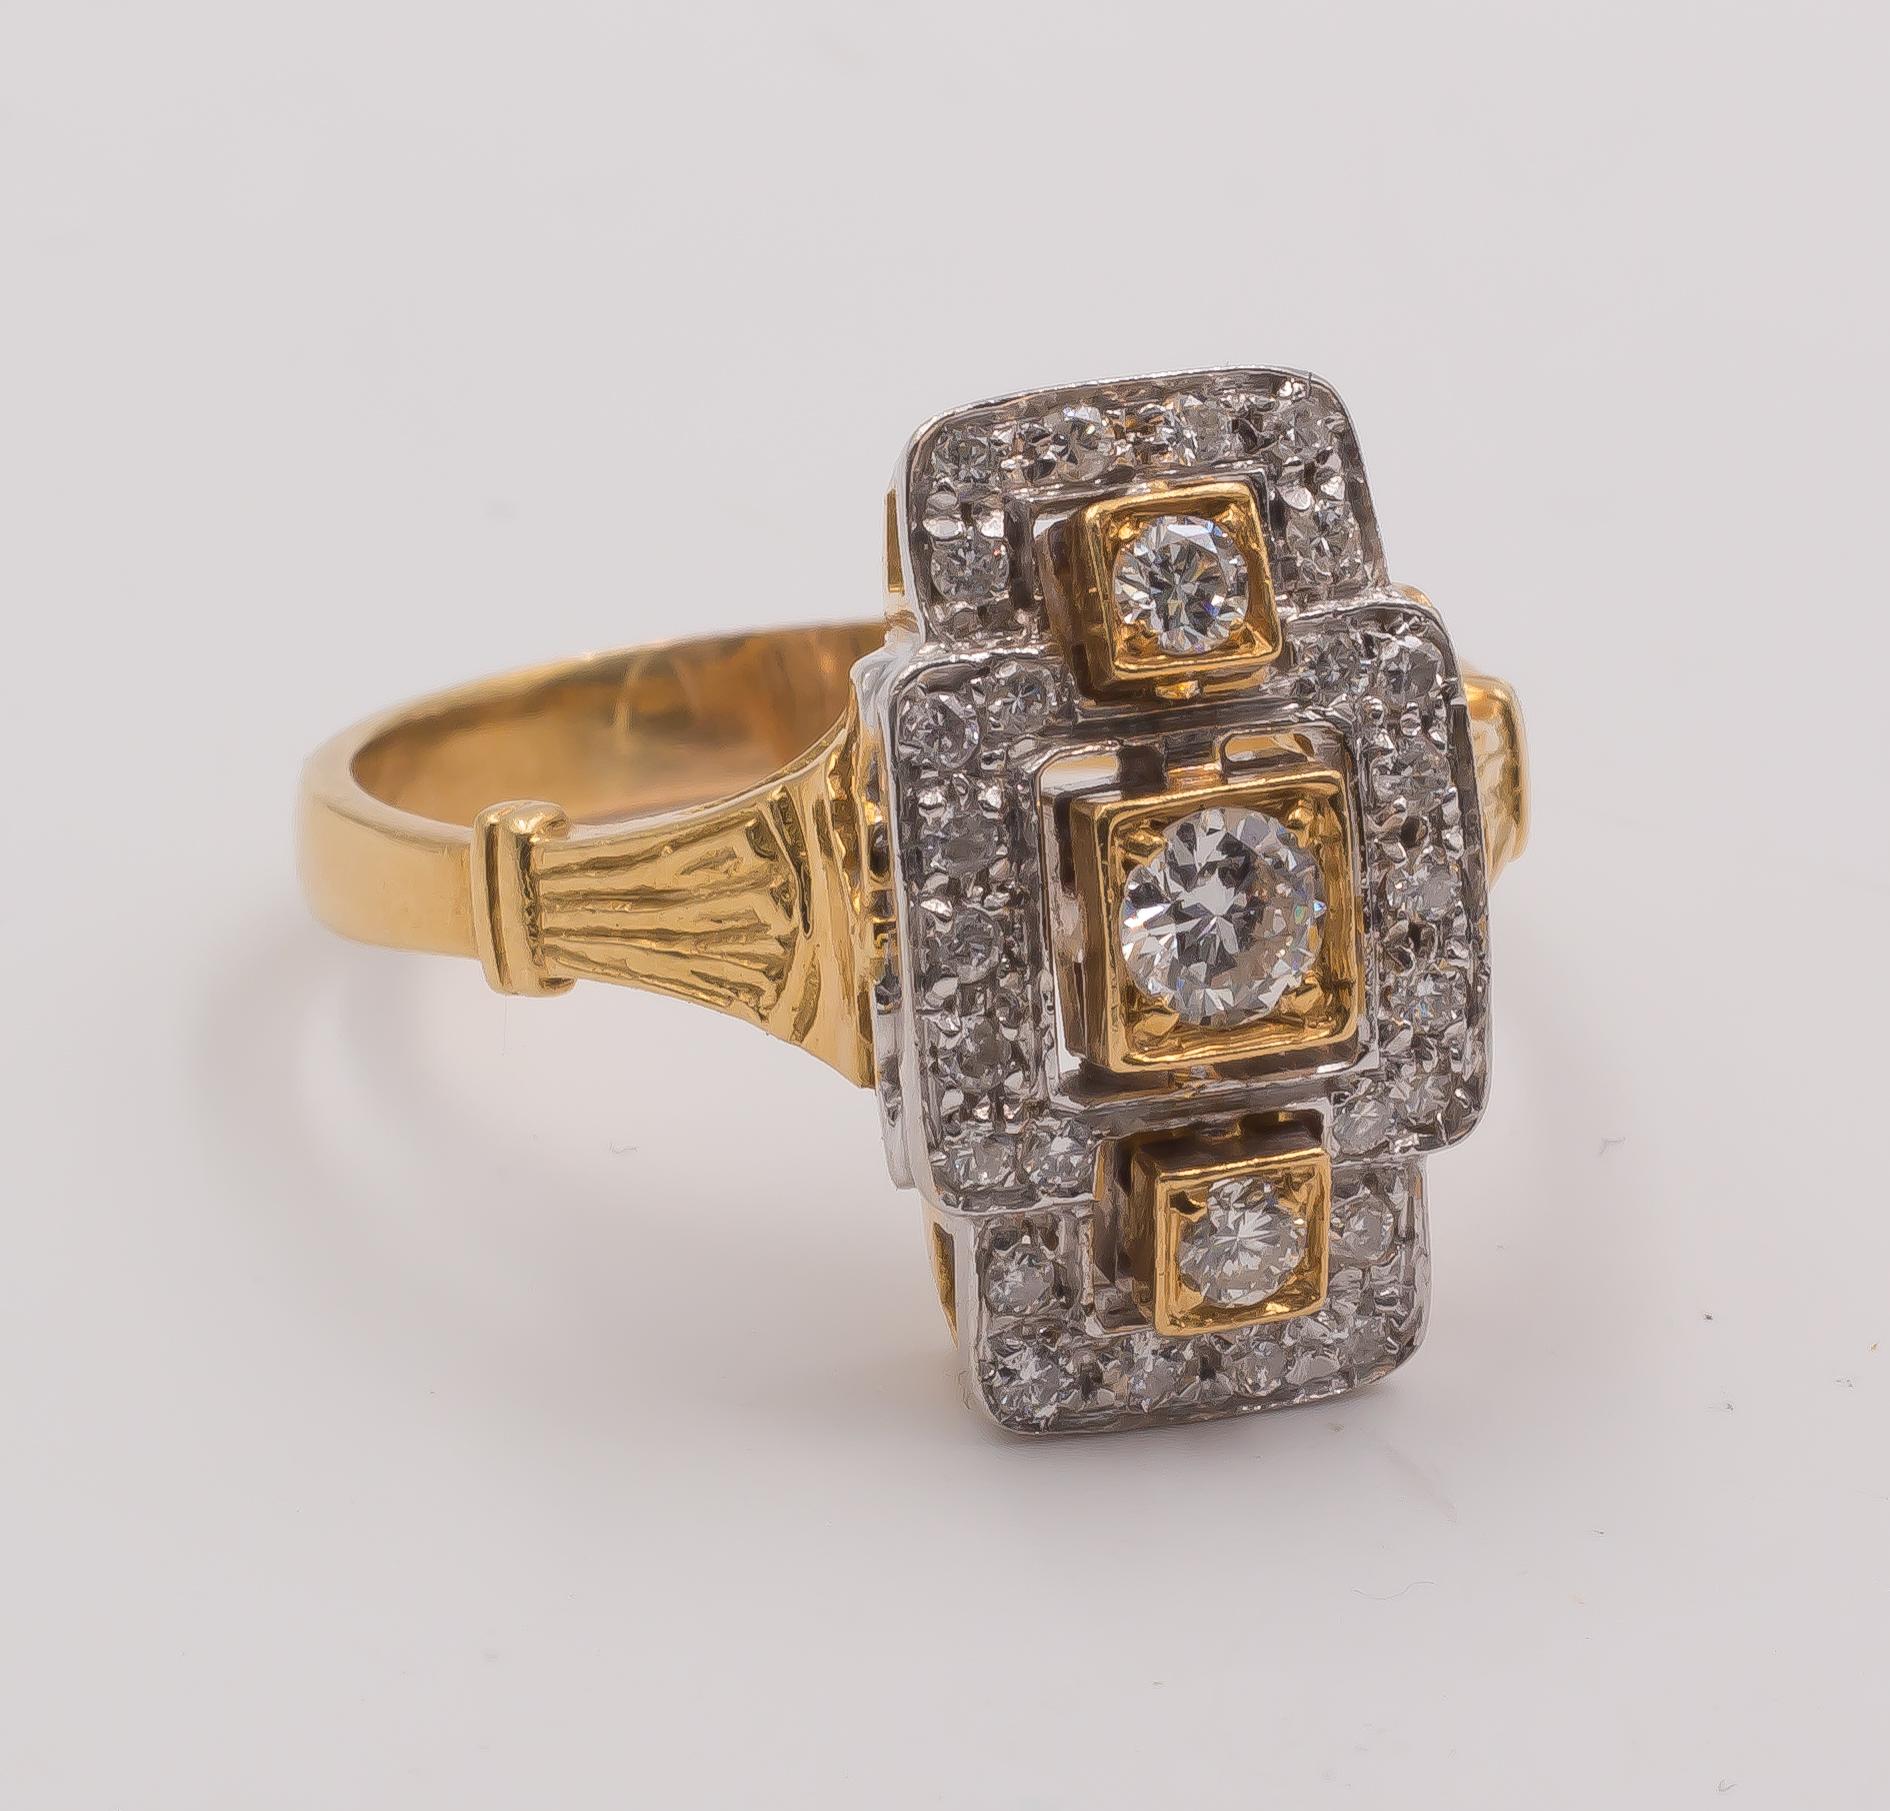 This vintage ring is decorated with three central round cut diamonds, set in a yellow gold mount; a set of round cut diamonds studs the entire head of the ring, crafted in both yellow and white gold. The ring is set with a beautiful opework, while